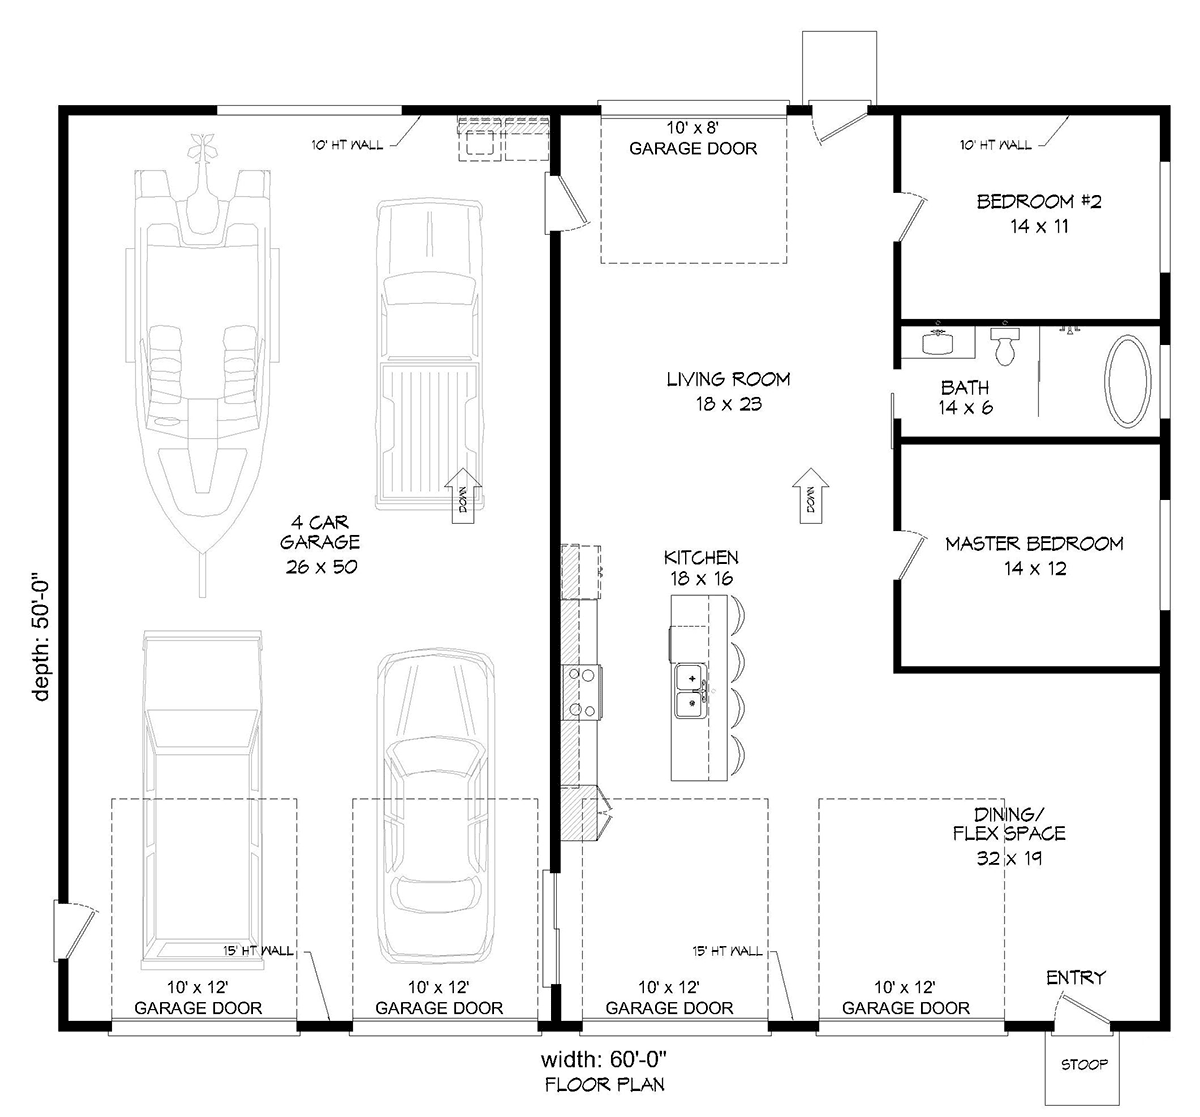 Bungalow, Contemporary, Craftsman Garage-Living Plan 52141 with 2 Bed, 1 Bath, 3 Car Garage Level One